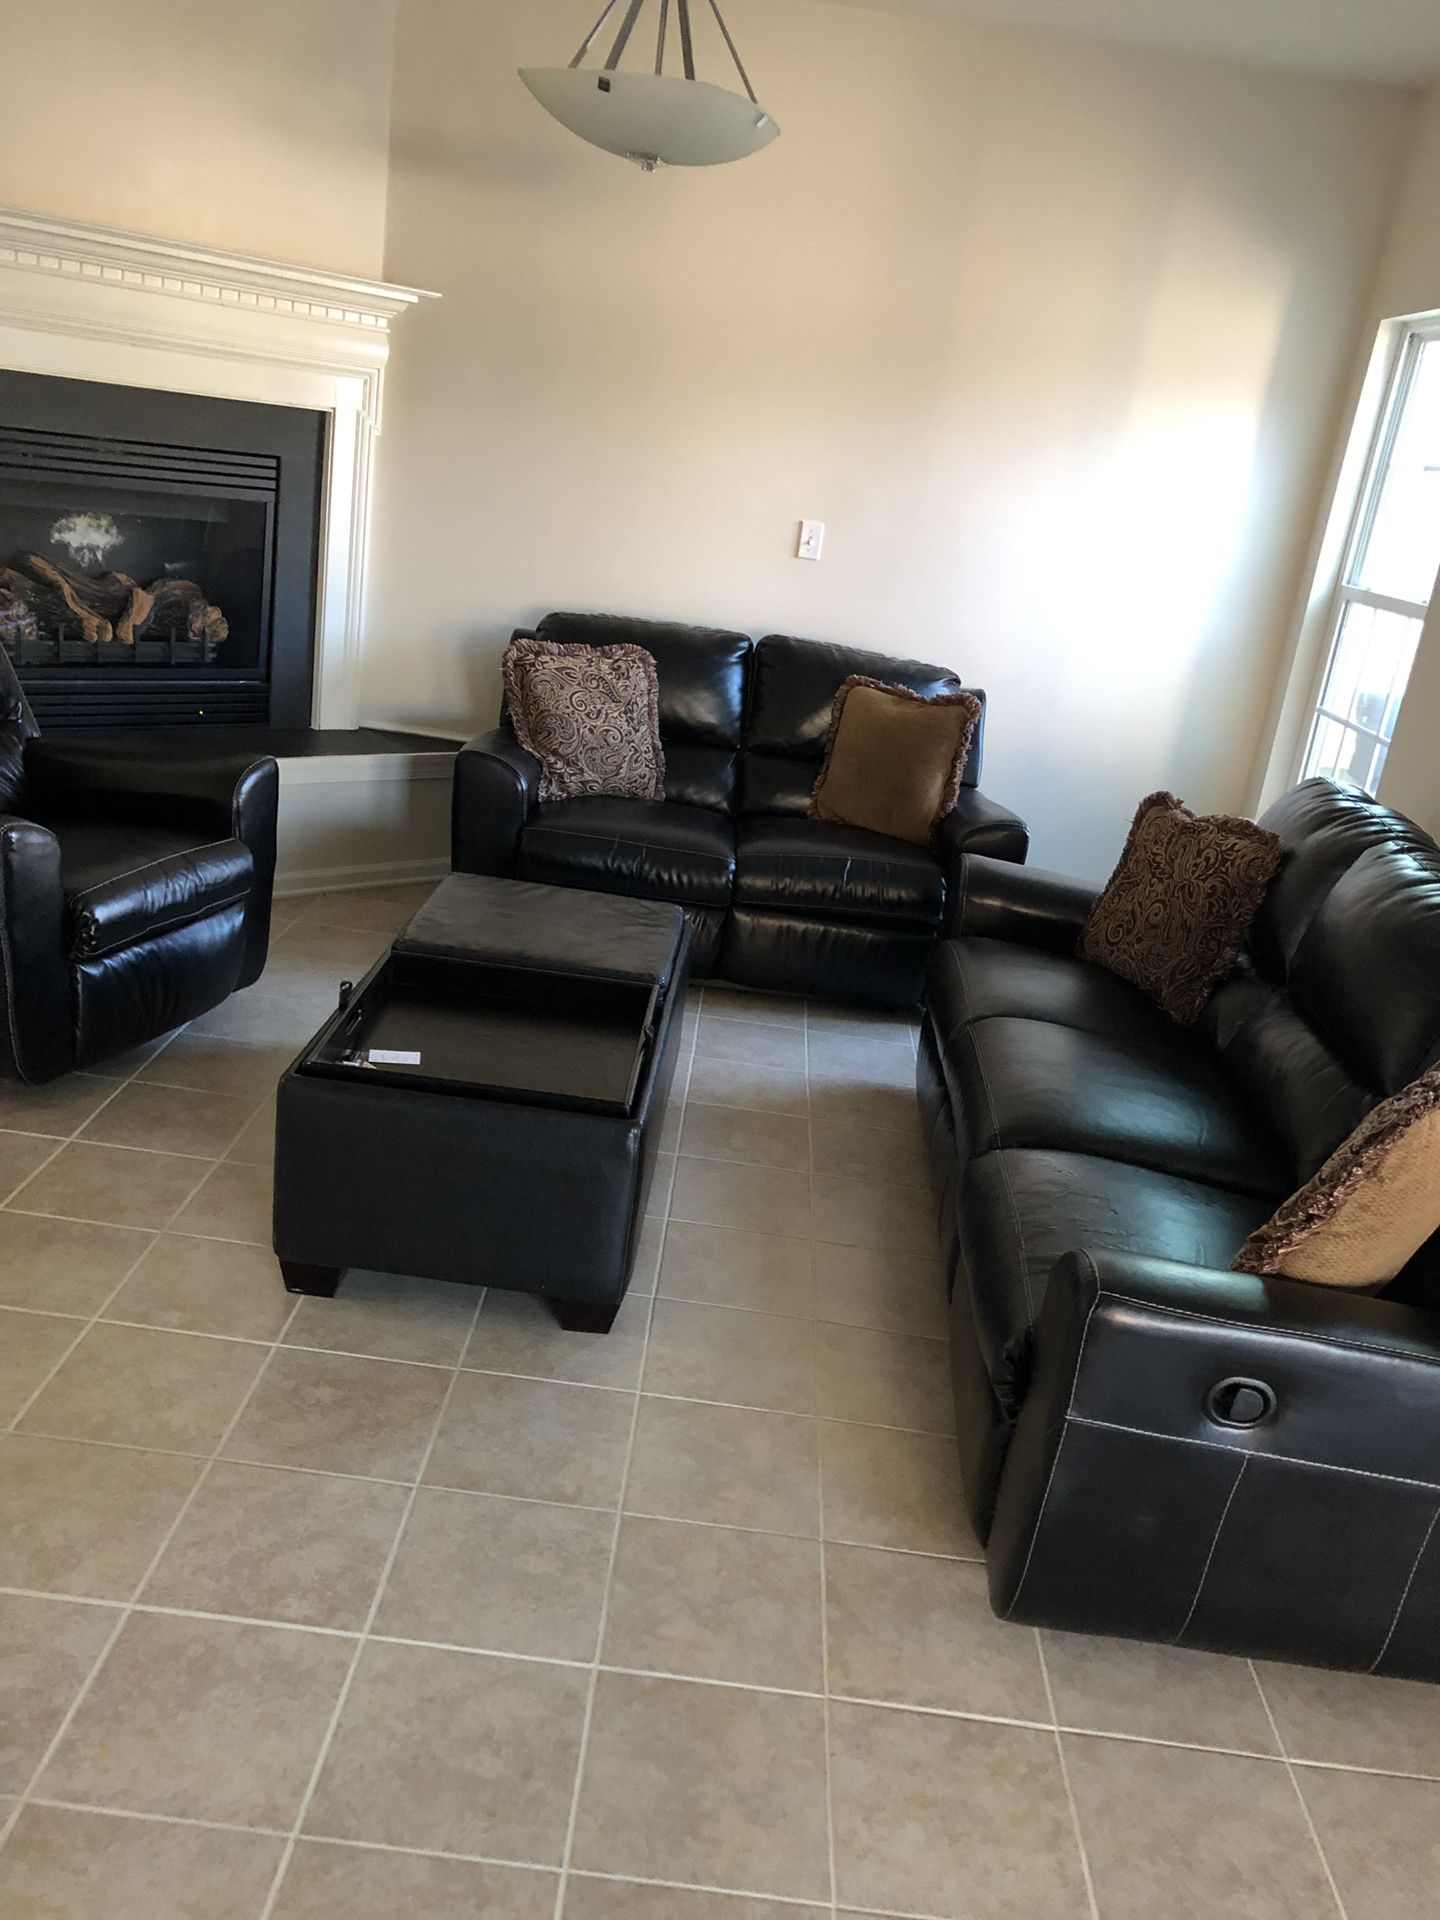 4 piece recliner couches with pillows